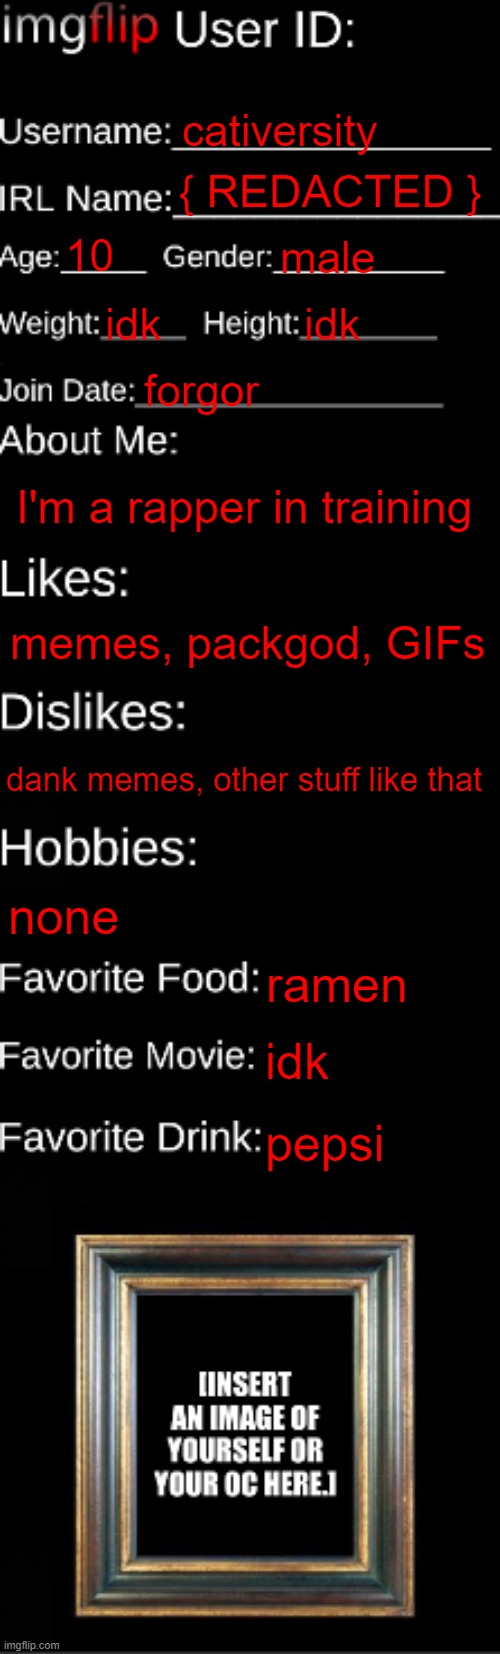 imgflip ID Card | cativersity; { REDACTED }; 10; male; idk; idk; forgor; I'm a rapper in training; memes, packgod, GIFs; dank memes, other stuff like that; none; ramen; idk; pepsi | image tagged in imgflip id card | made w/ Imgflip meme maker